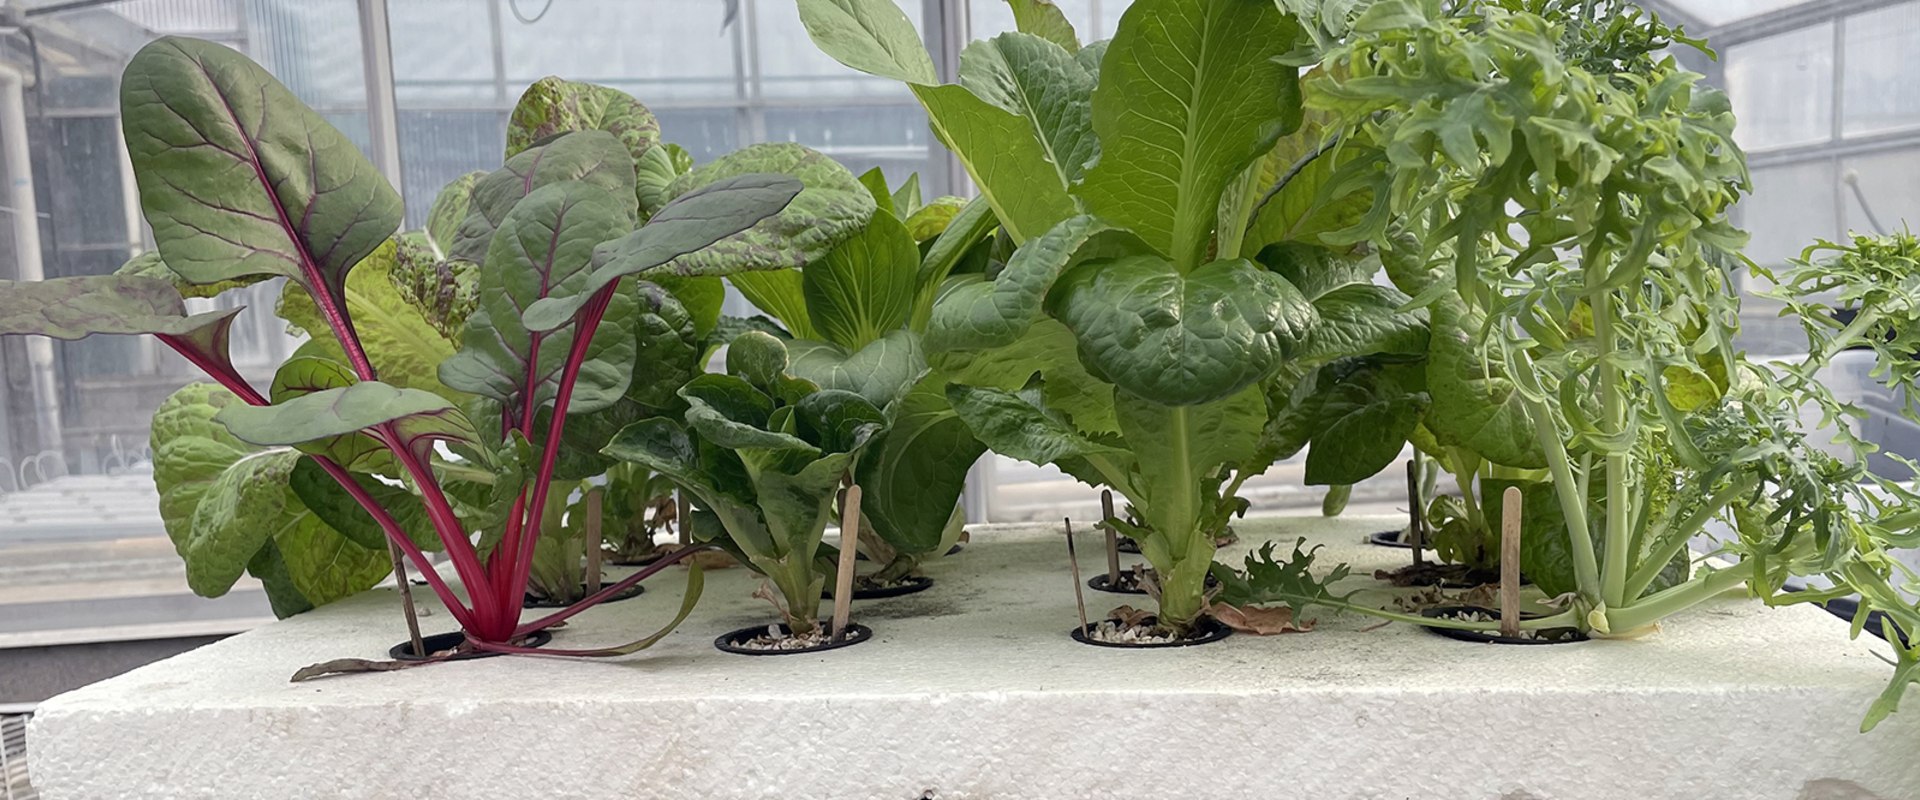 Everything You Need to Know About Calcium, Magnesium, and Sulfur for Hydroponic Gardening